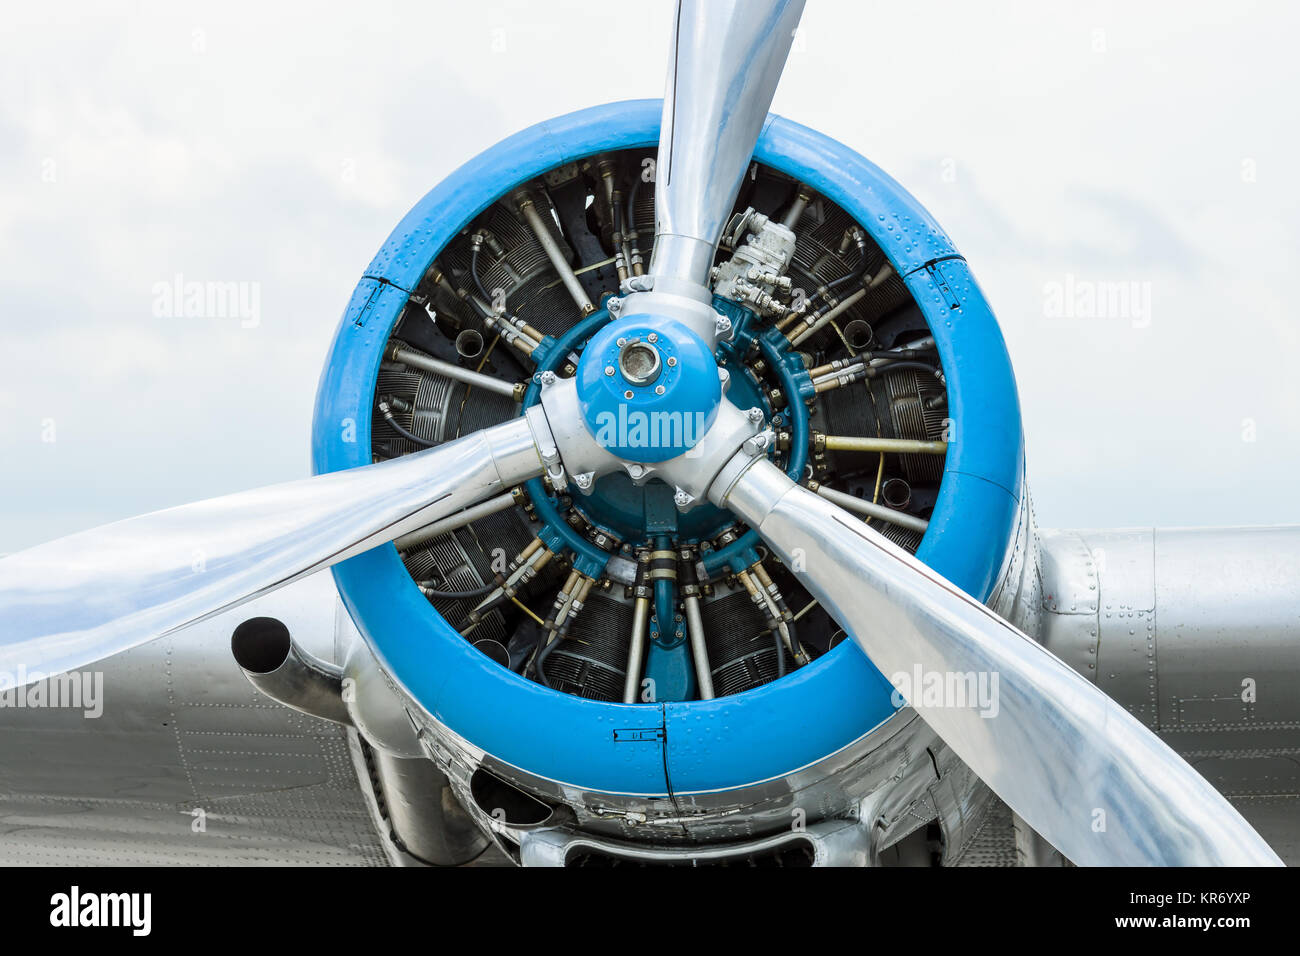 Radial engine of an aircraft. Close-up. Stock Photo